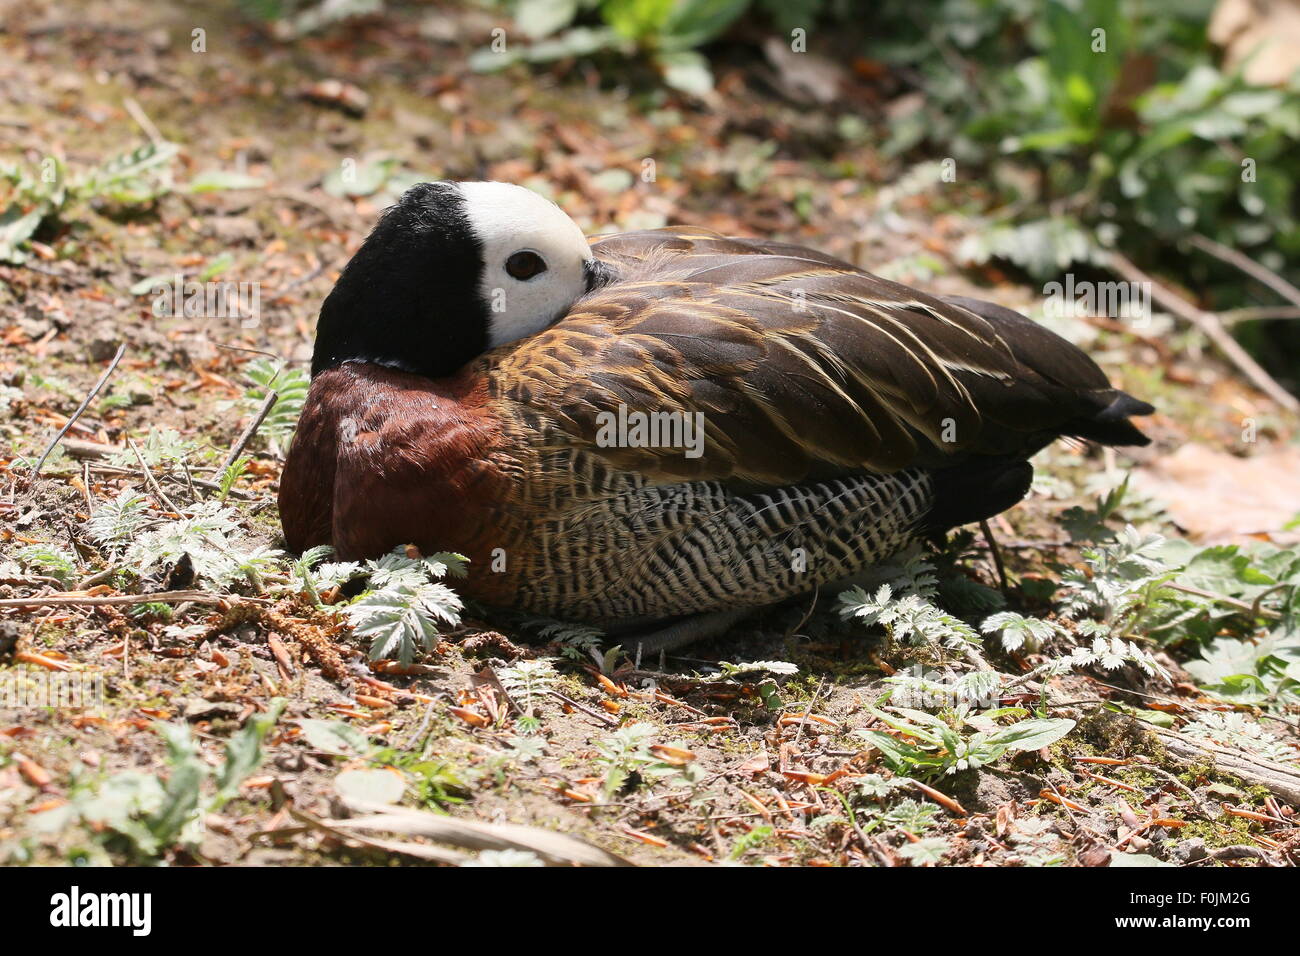 Tropical White-faced whistling duck (Dendrocygna viduata), native to sub-Saharan Africa and much of South America. Stock Photo